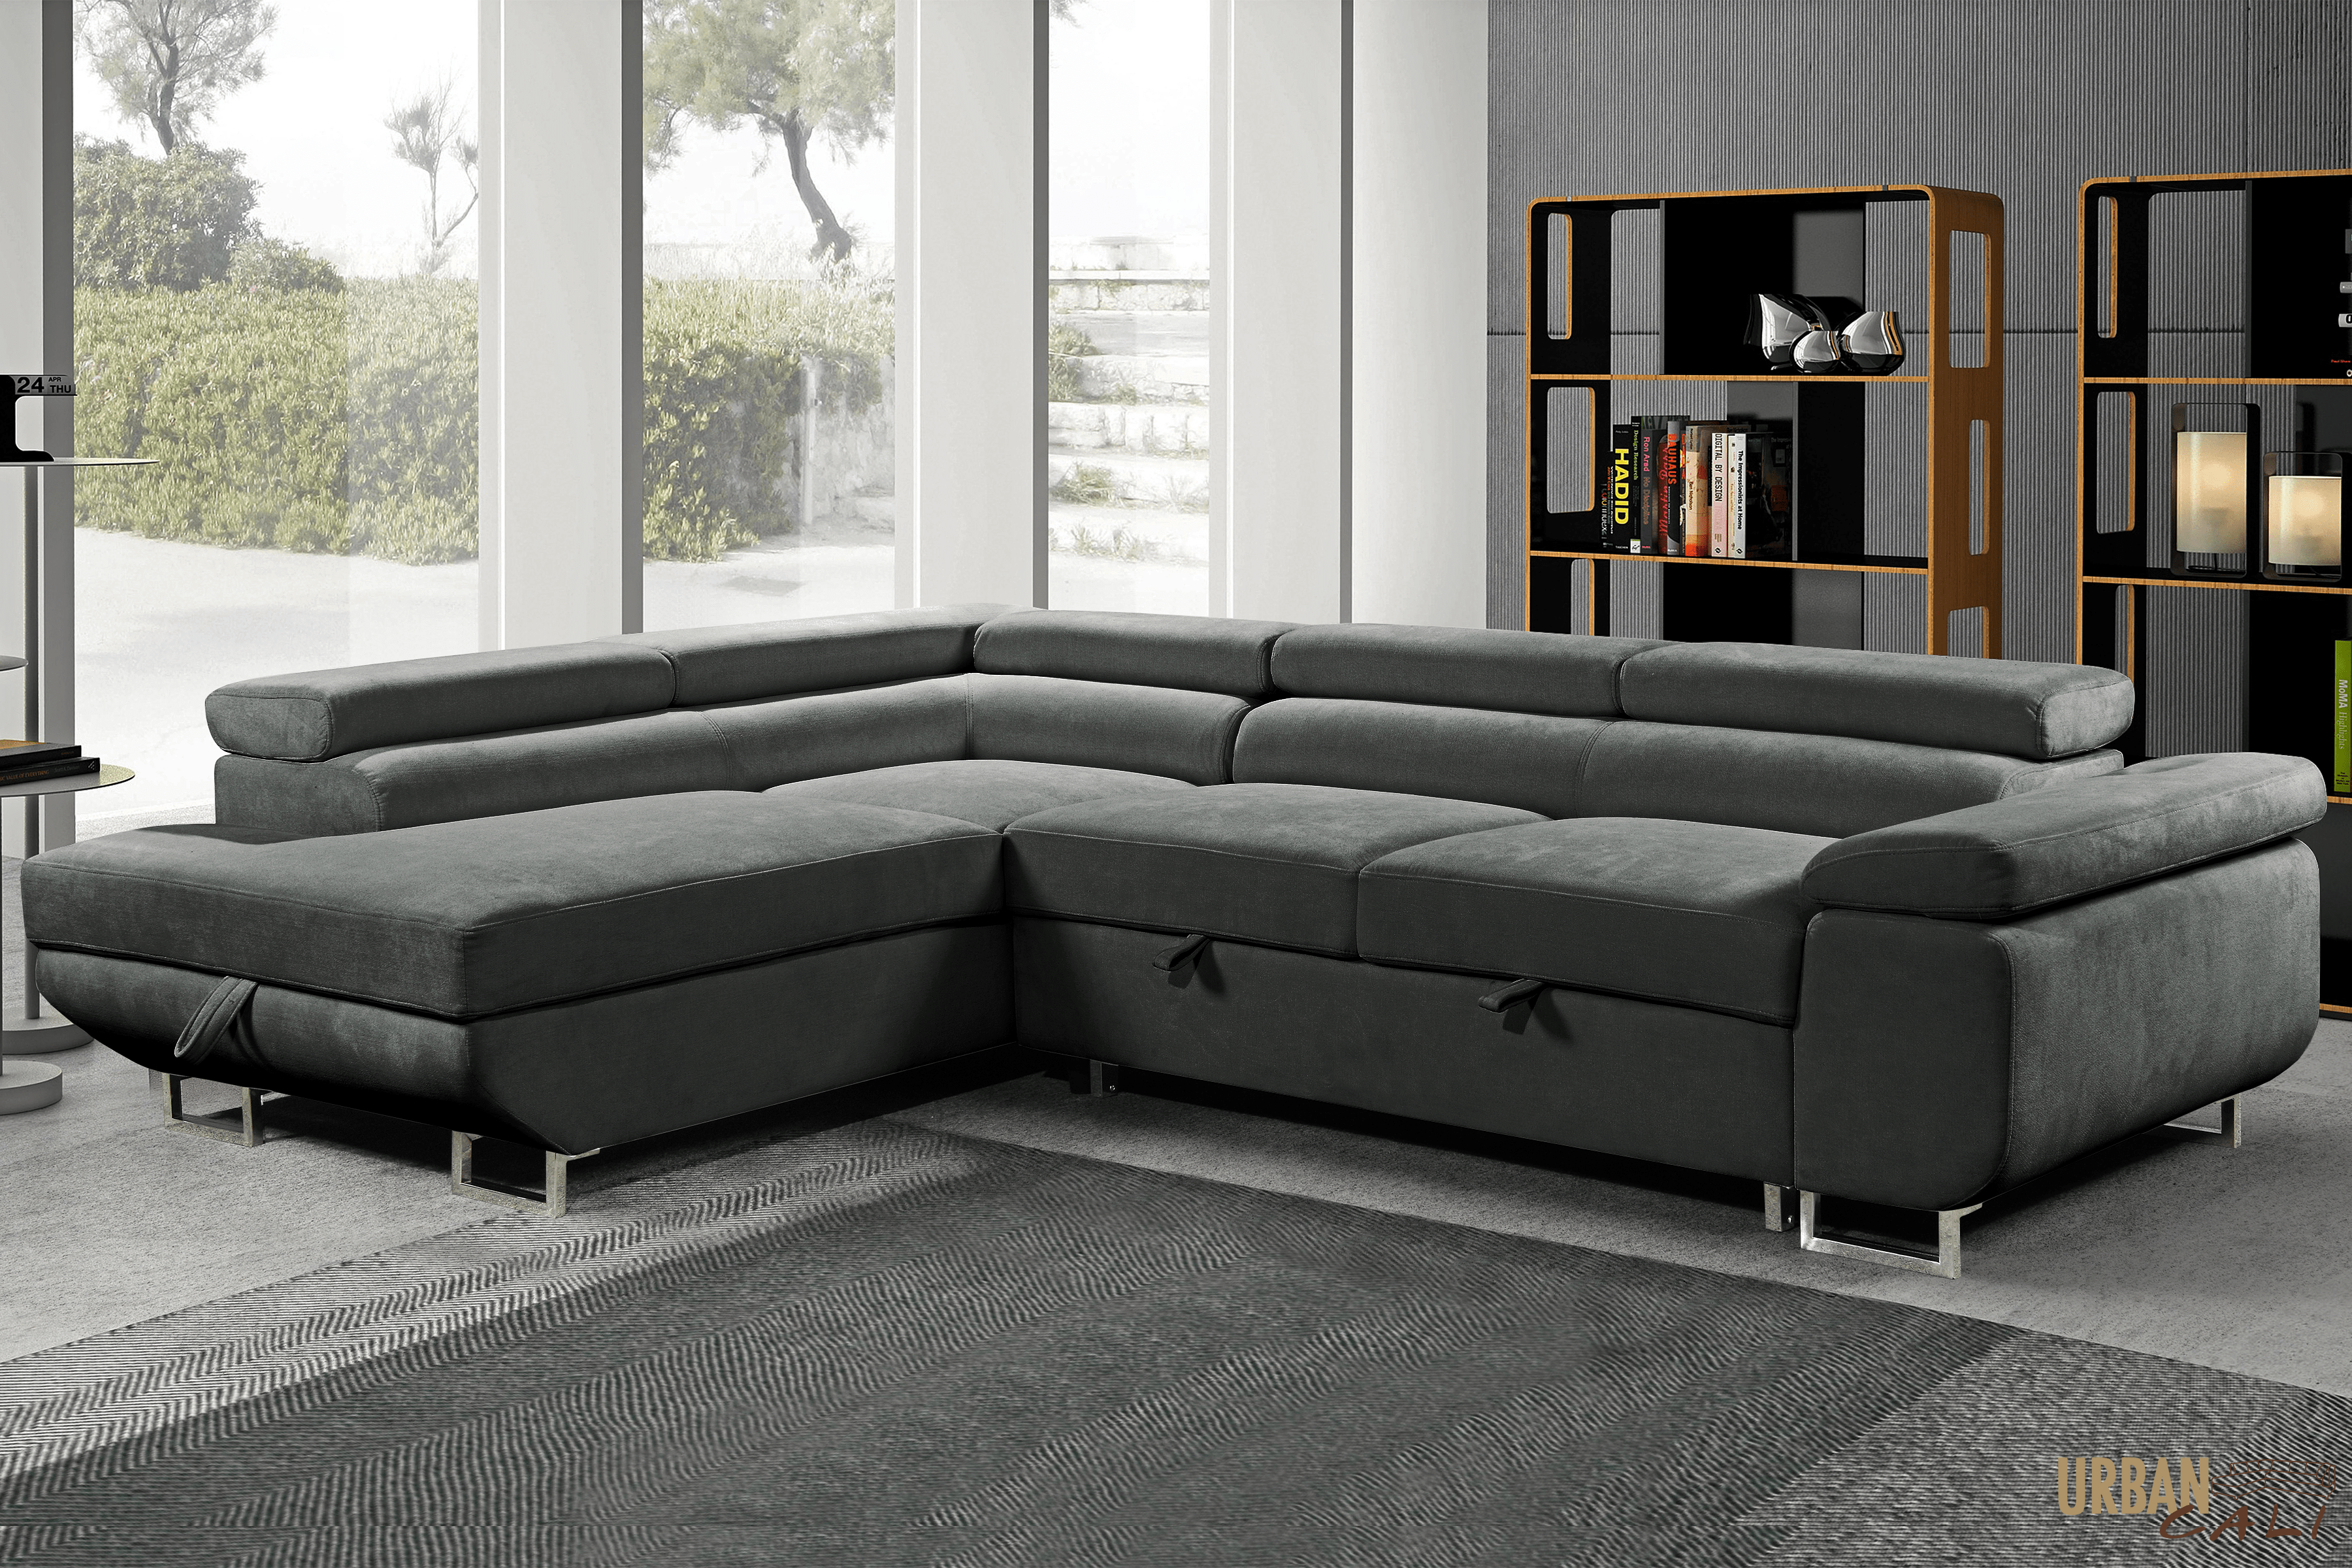 Urban Cali Sectional Sofa Hollywood Sleeper Sectional Sofa Bed with Adjustable Headrests and Storage Chaise in Ulani Cream